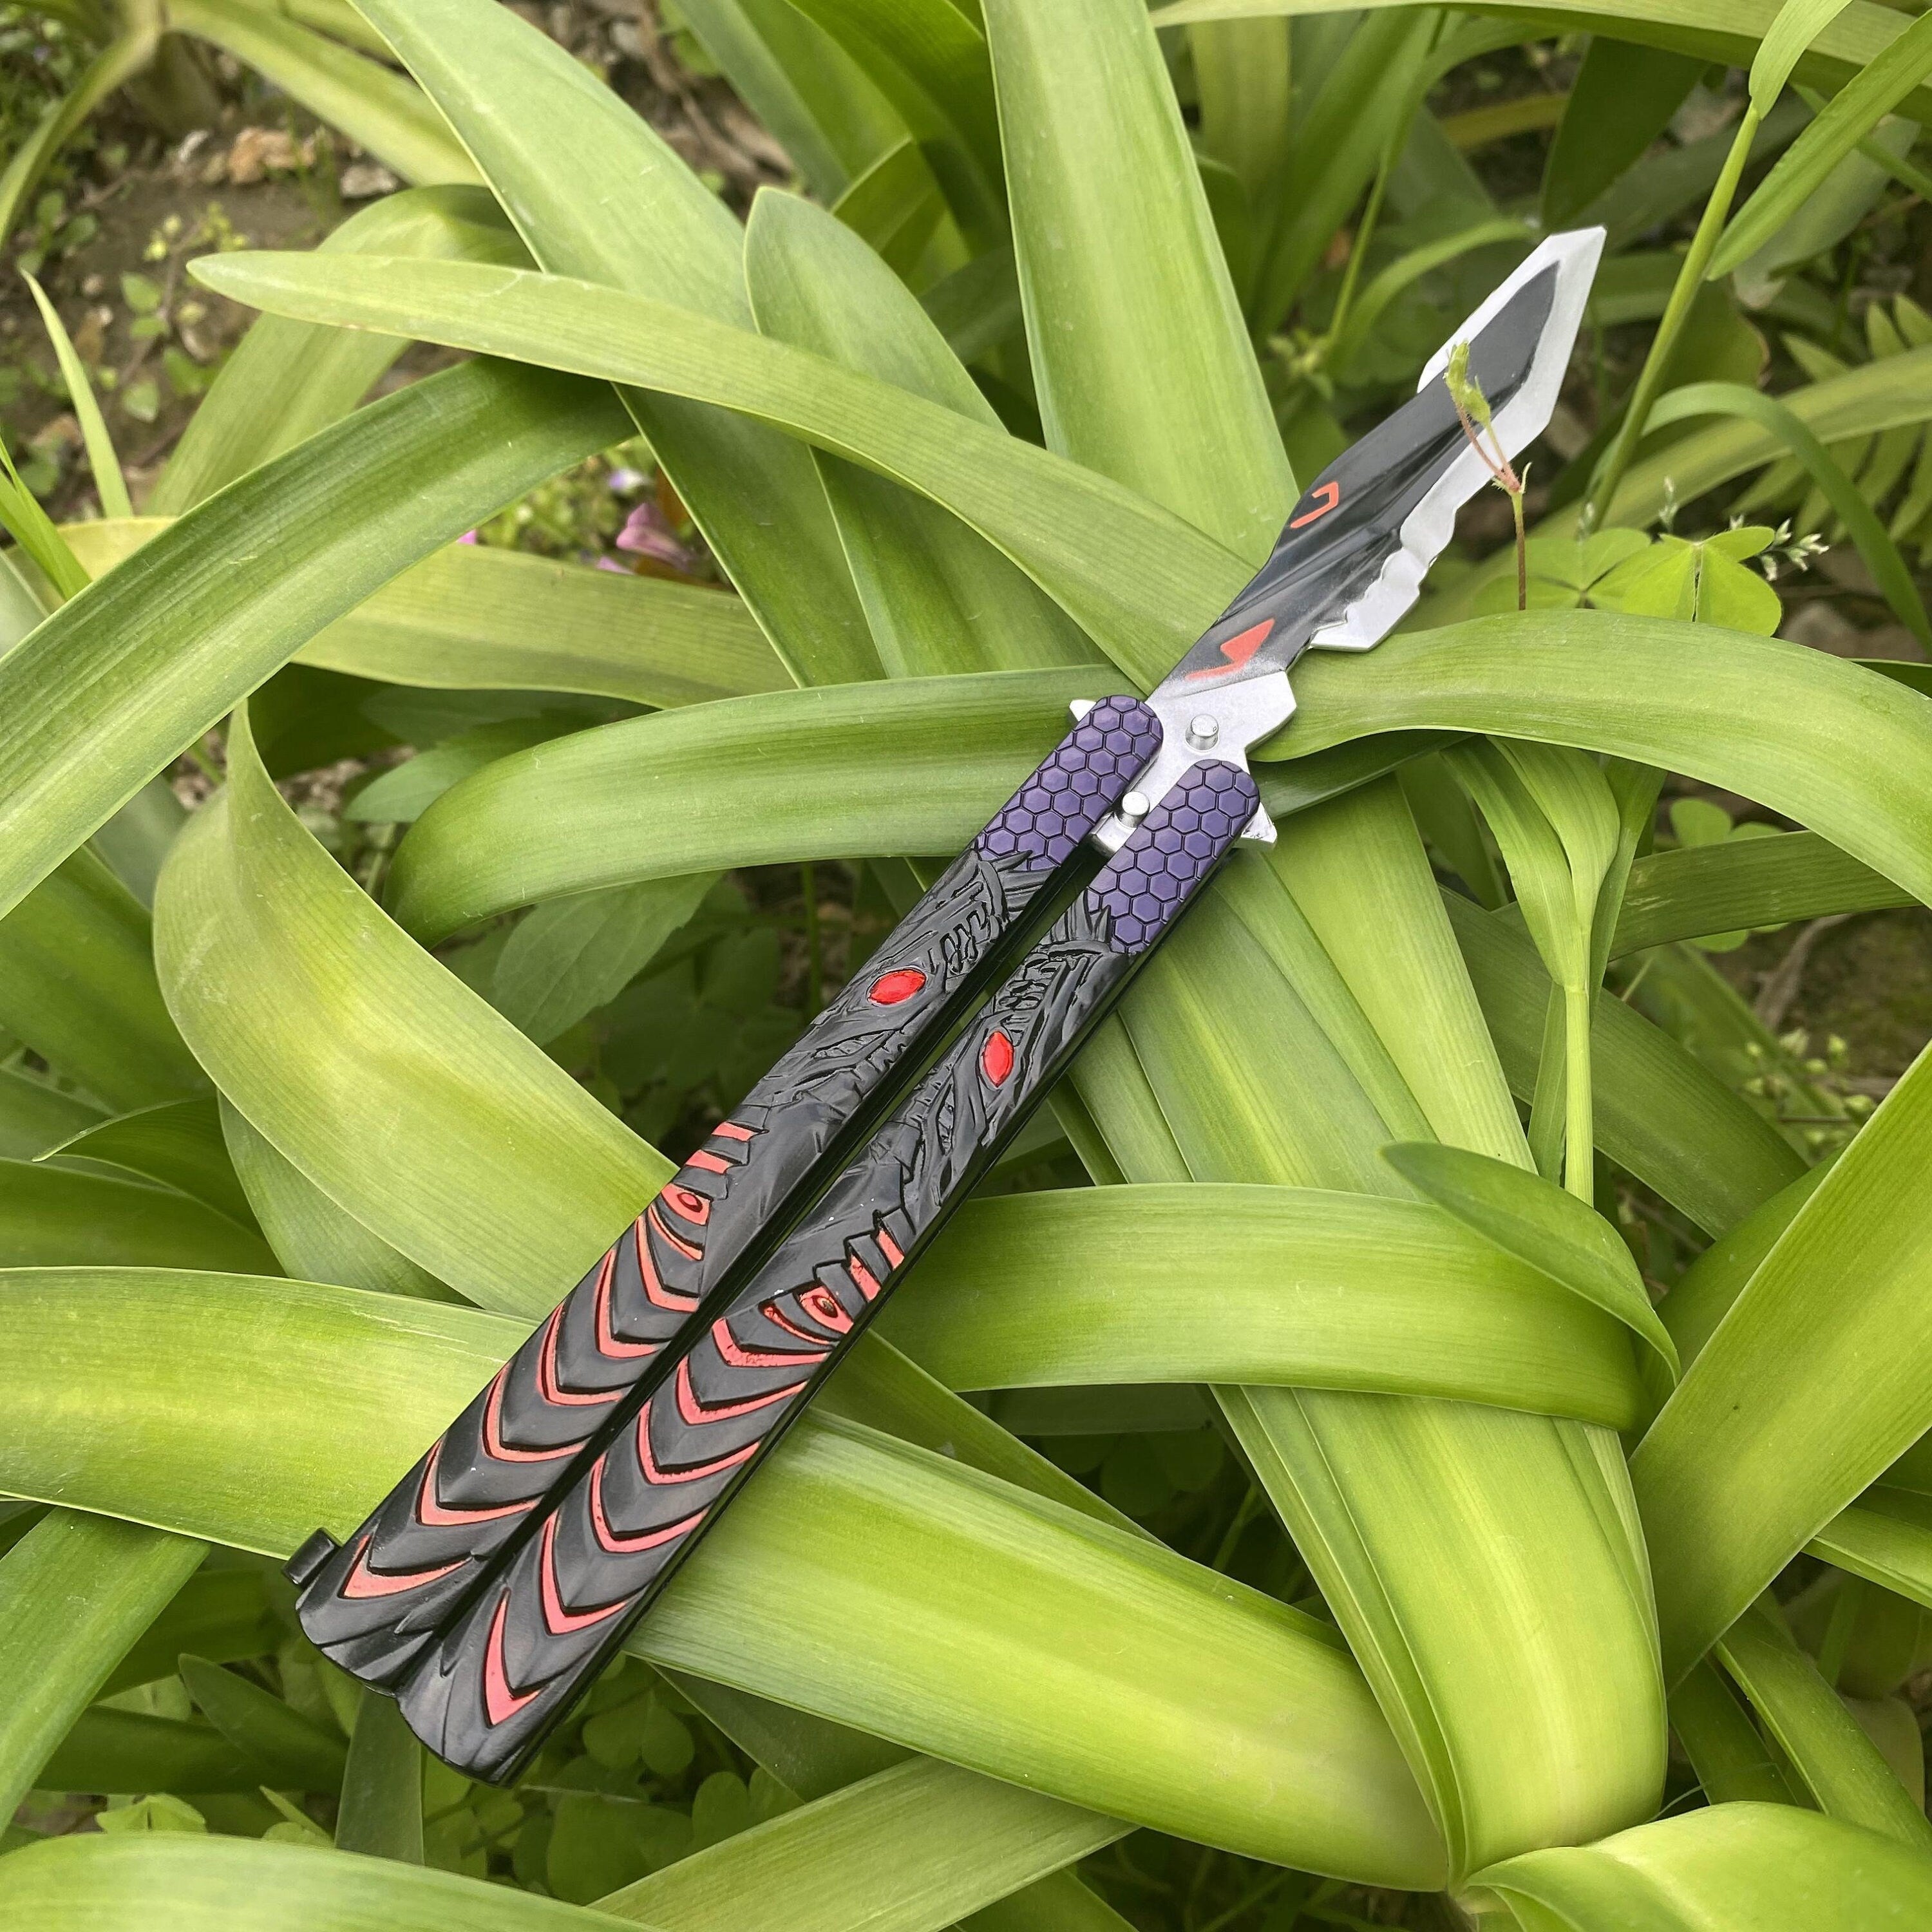 Hot Game Robot Butterfly Knife